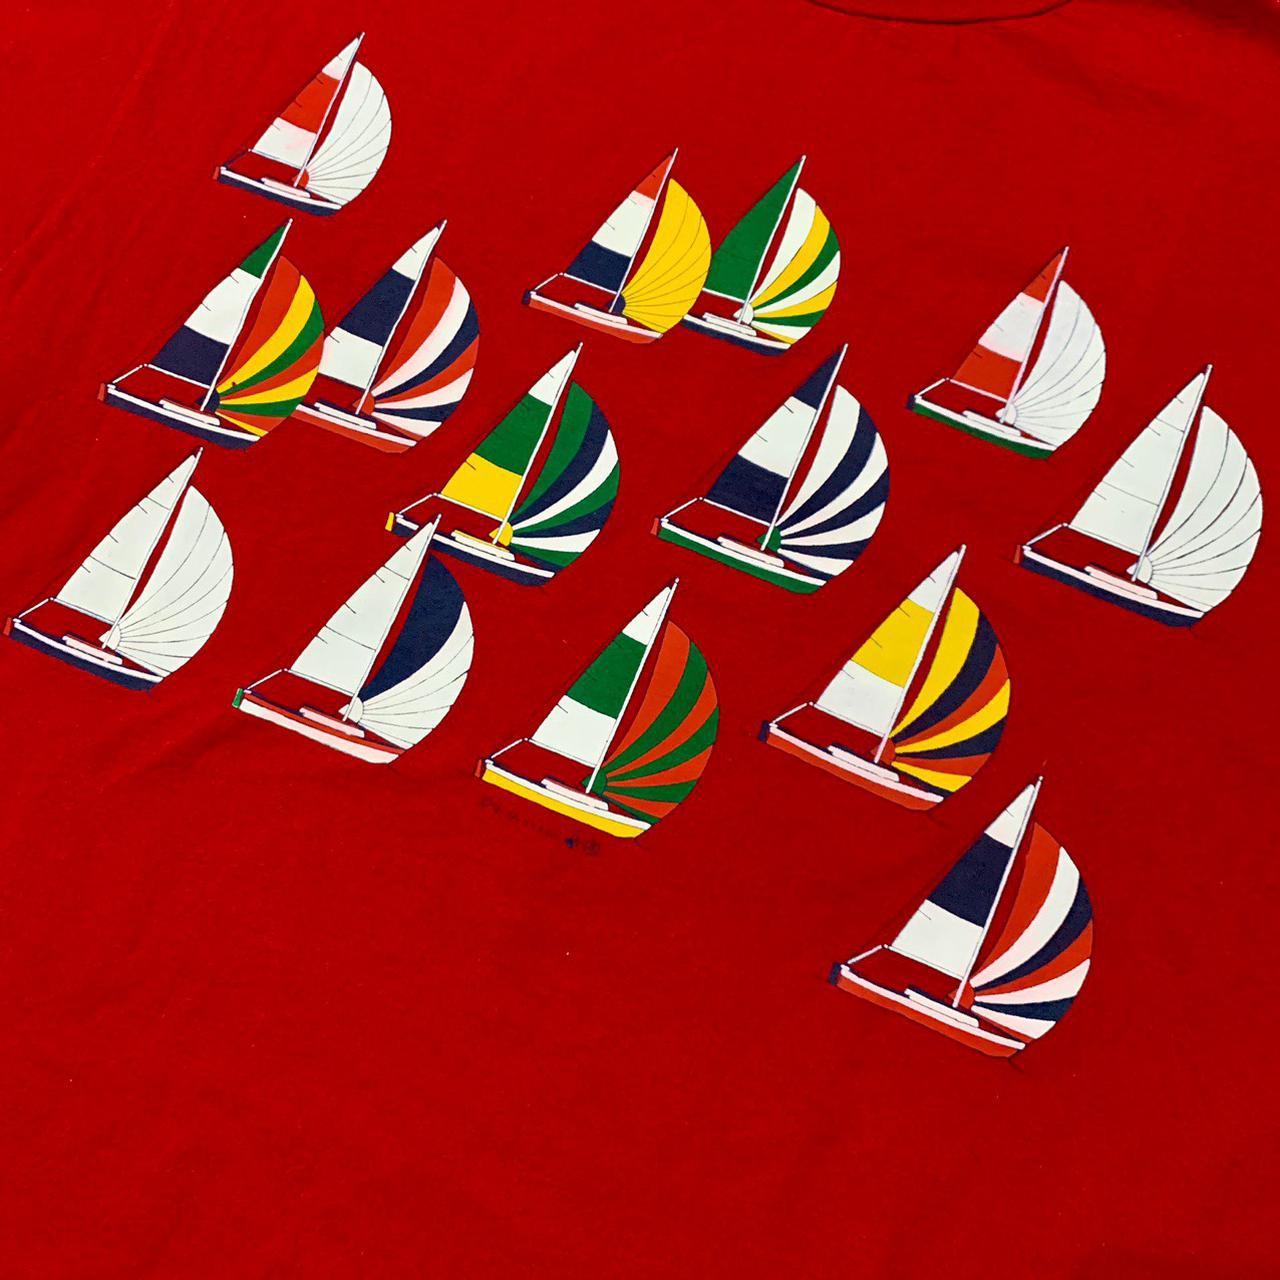 Product Image 2 - Vintage Sailboat Shirt

- Great Condition!
-